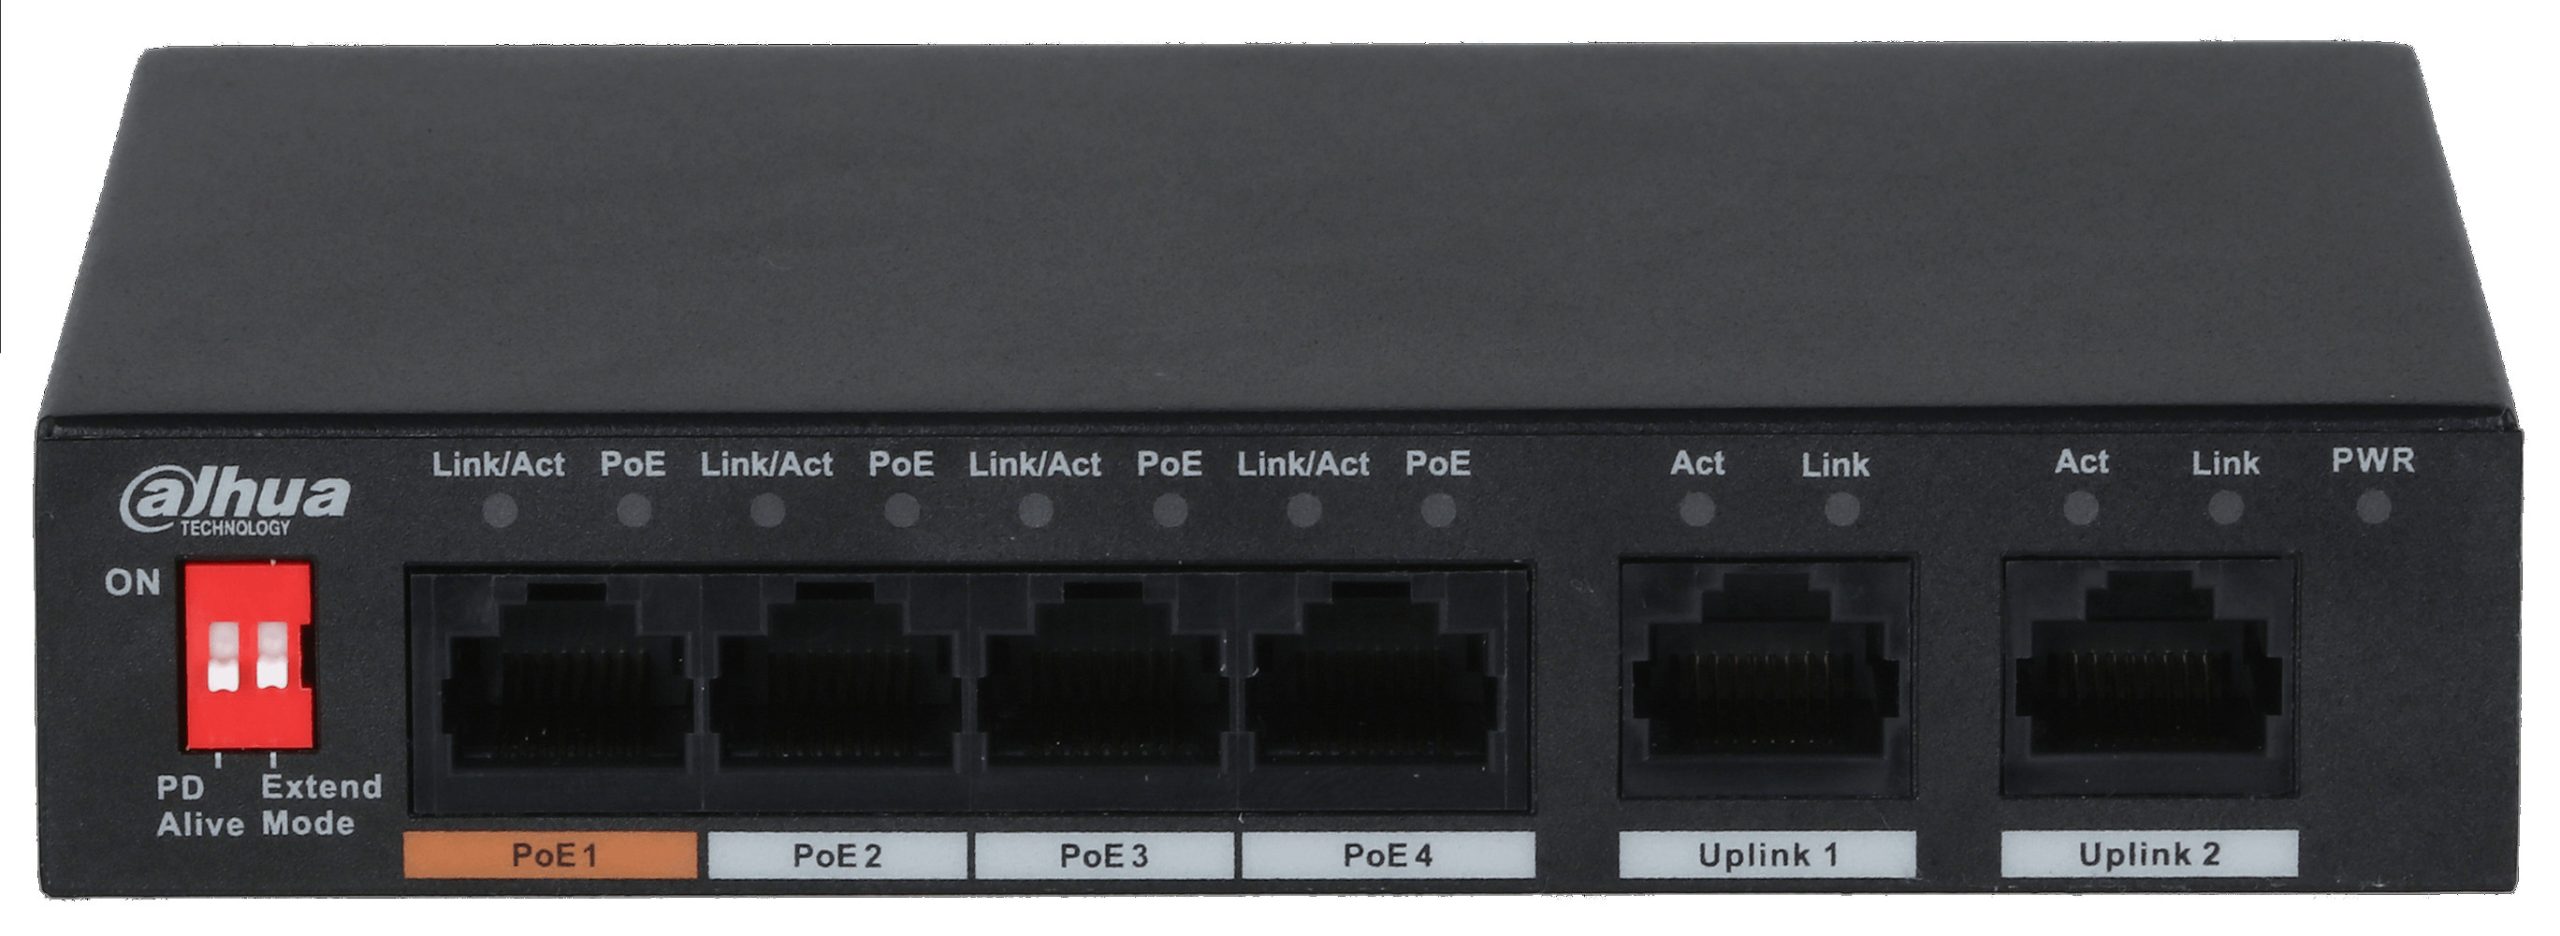 Dahua DH-PFS3006-4ET-60 is a 4-Port Fast Ethernet Switch With 250m Long Distance POE Transmission Hi-Poe (60W) and Two Transmission Modes.